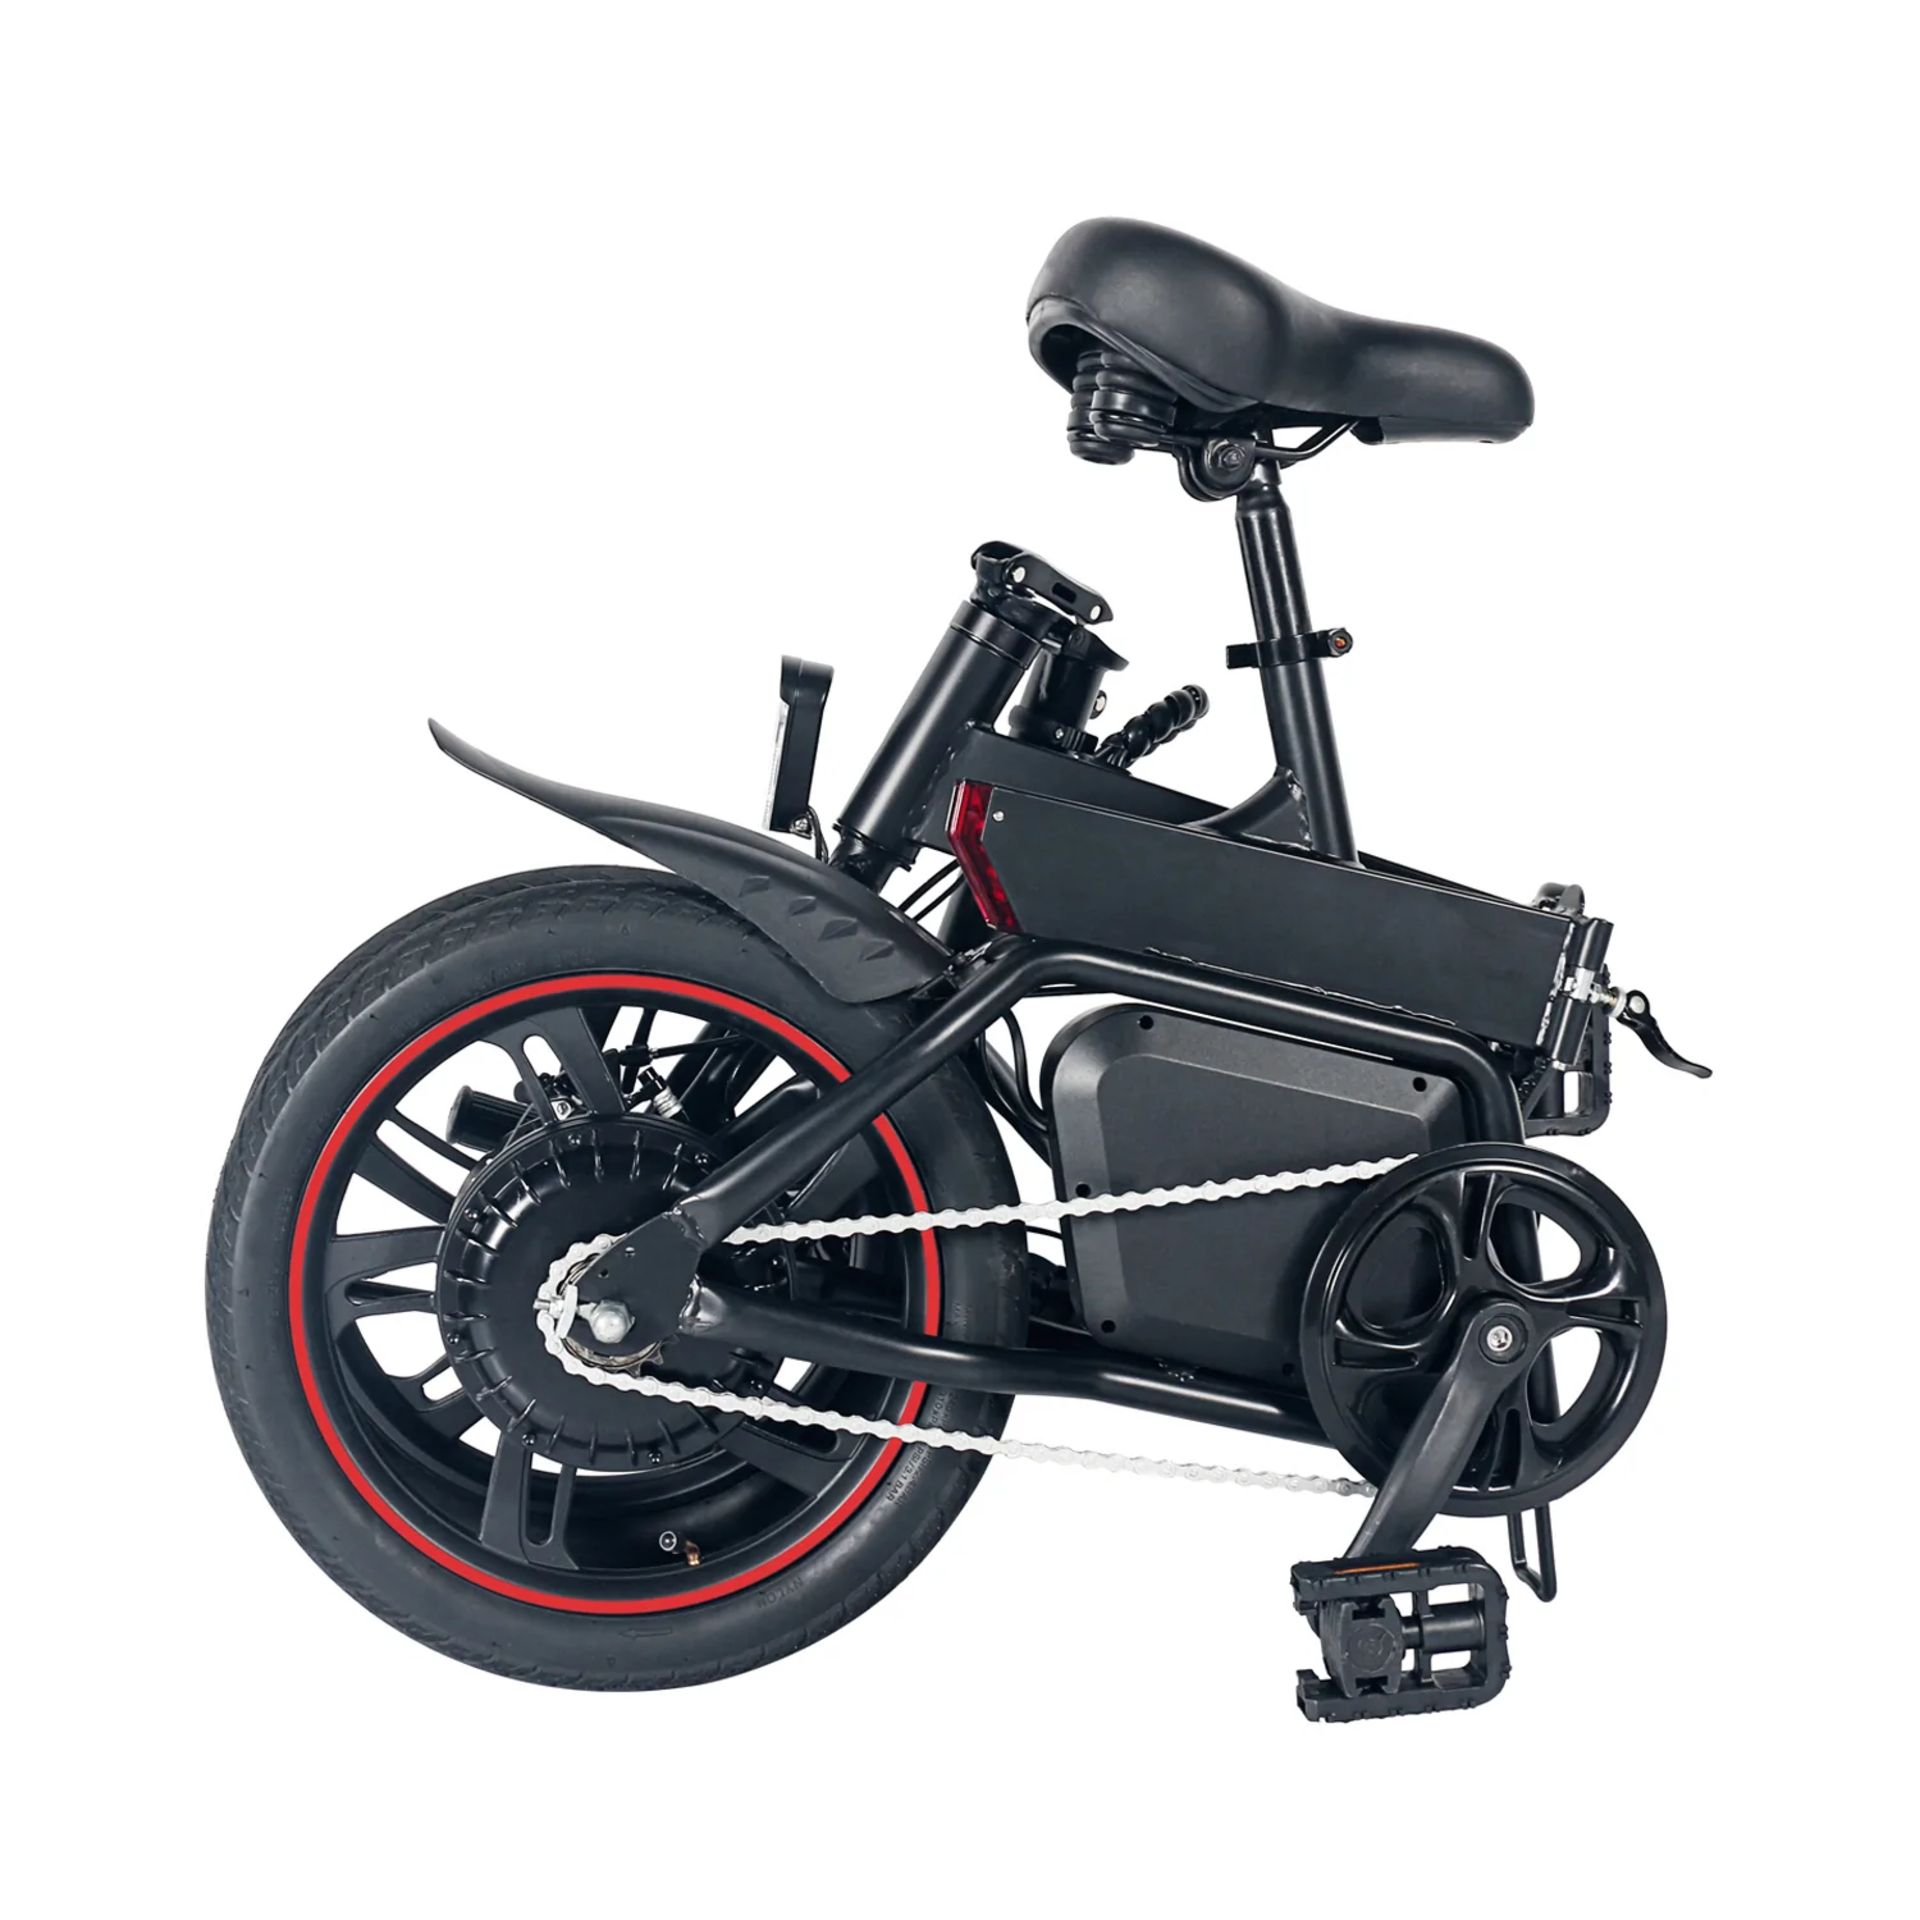 5 X Windgoo B20 Pro Electric Bike. RRP £1,100.99. With 16-inch-wide tires and a frame of upgraded - Bild 5 aus 7